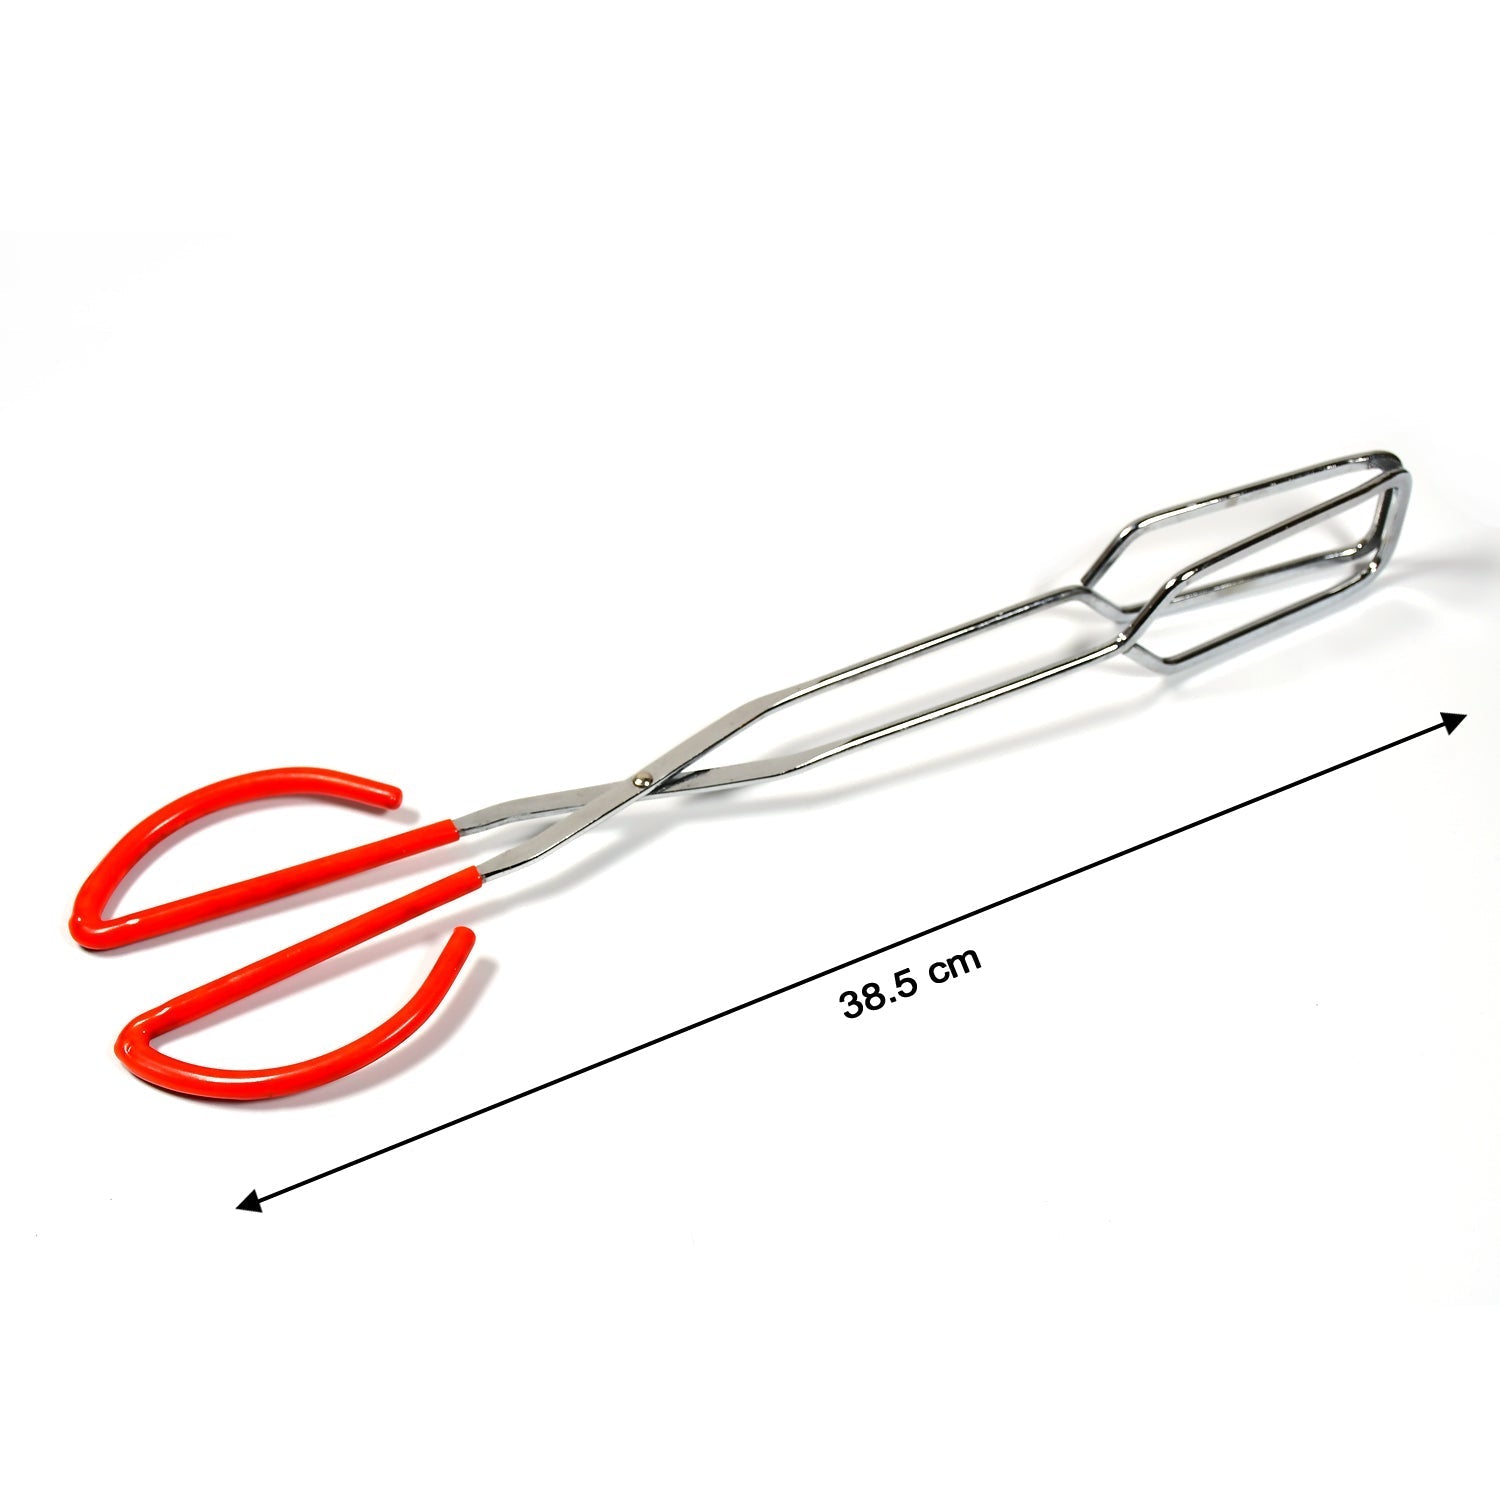 2984 Kitchen Baking BBQ Heat Resistant Cooking Food Clip with Silicone Tips Tongs , Pack of 1 DeoDap